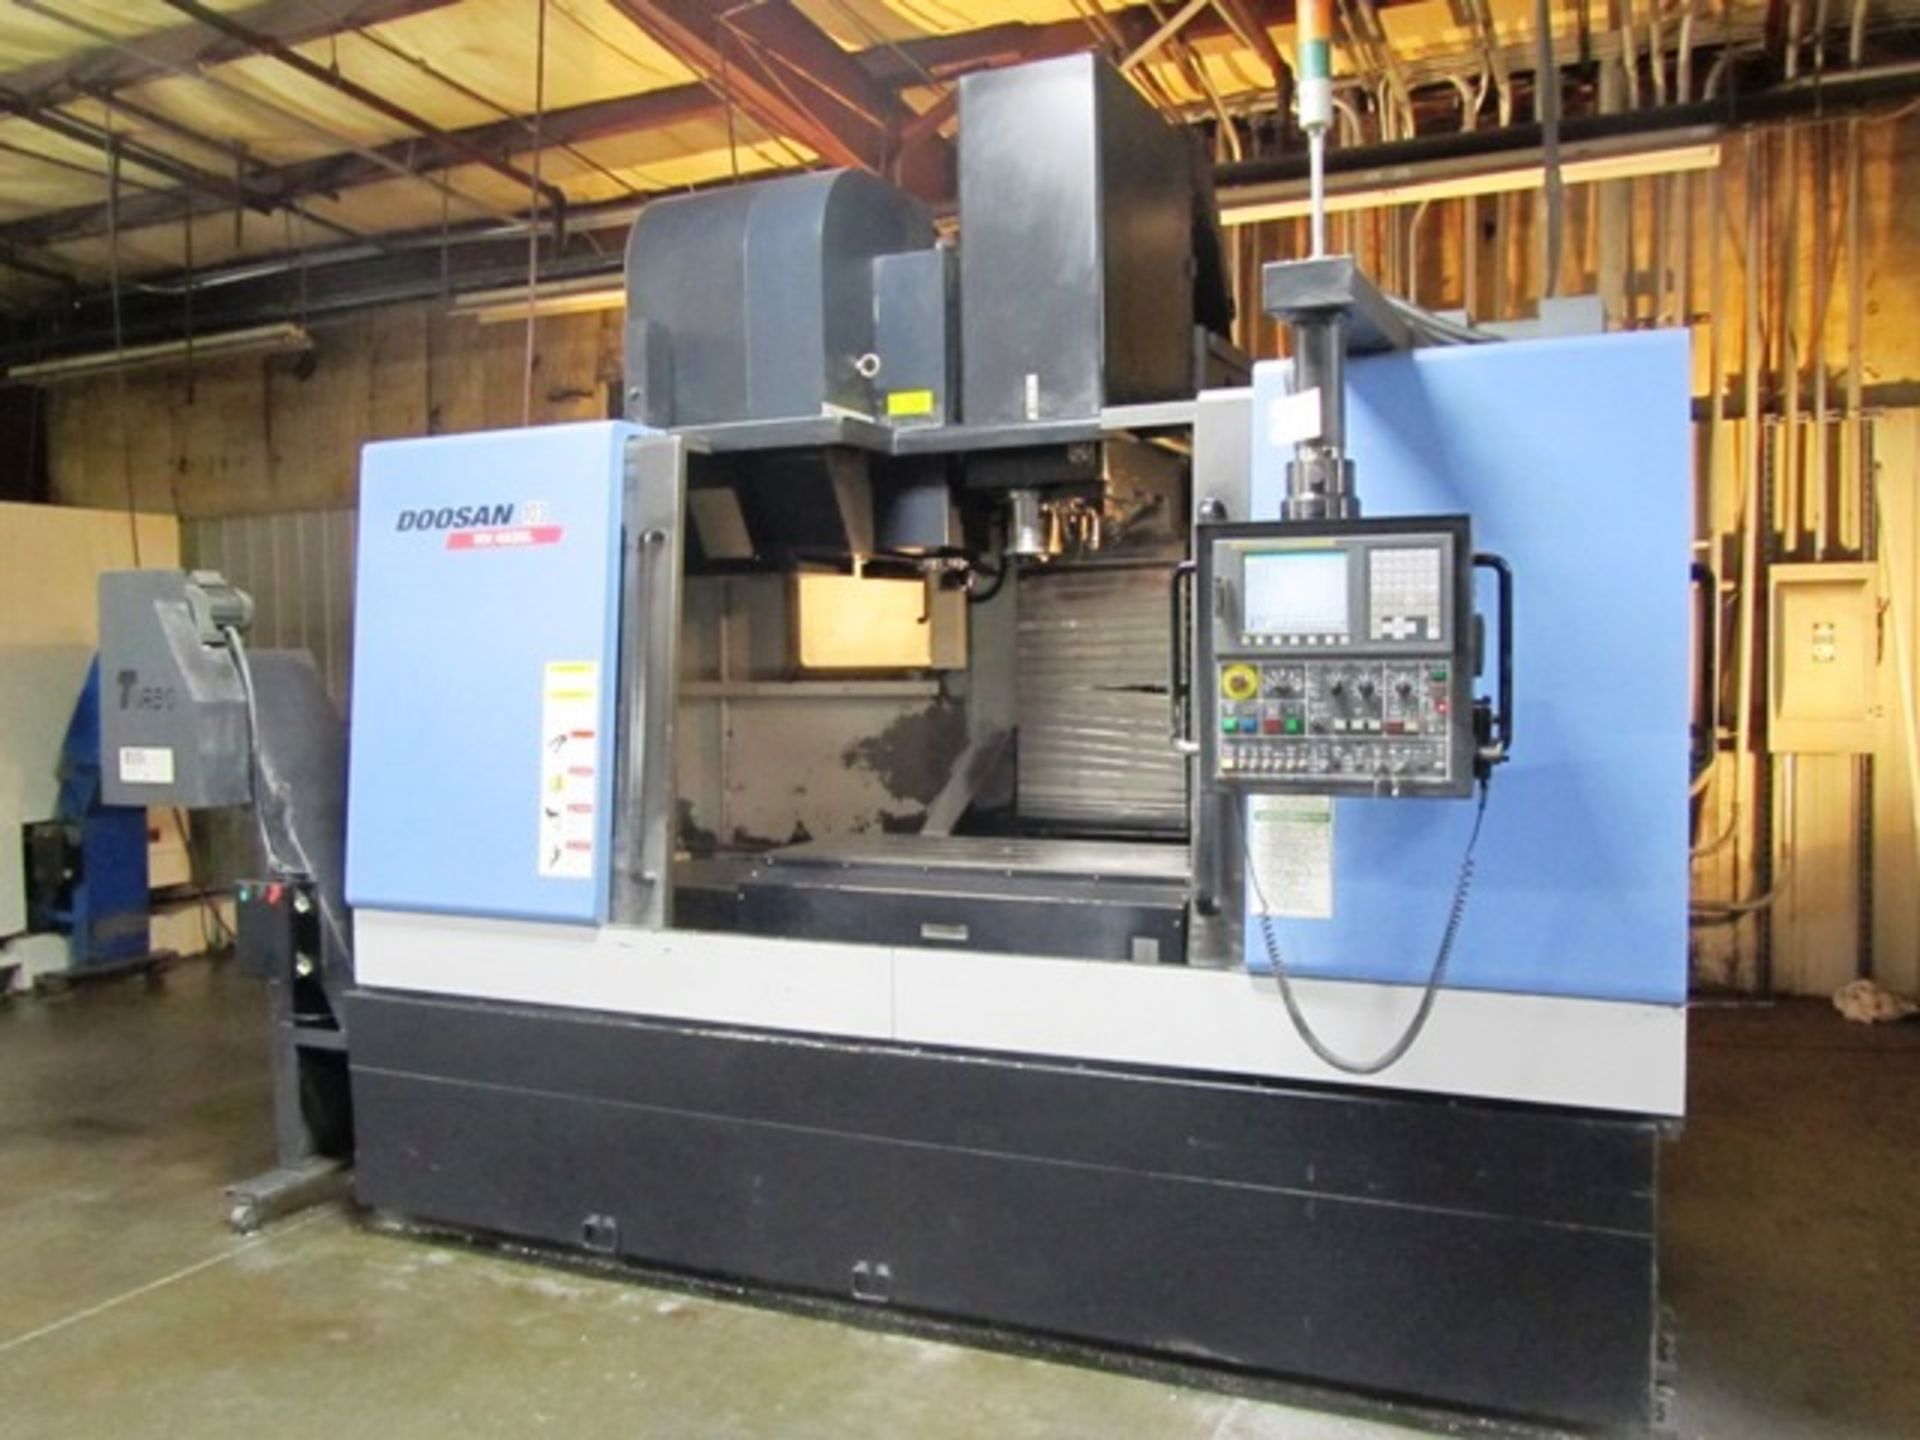 Doosan MV 4020L CNC Vertical Machining Center with 48'' x 20'' Worktable, #40 Taper Spindle Speeds - Image 4 of 5